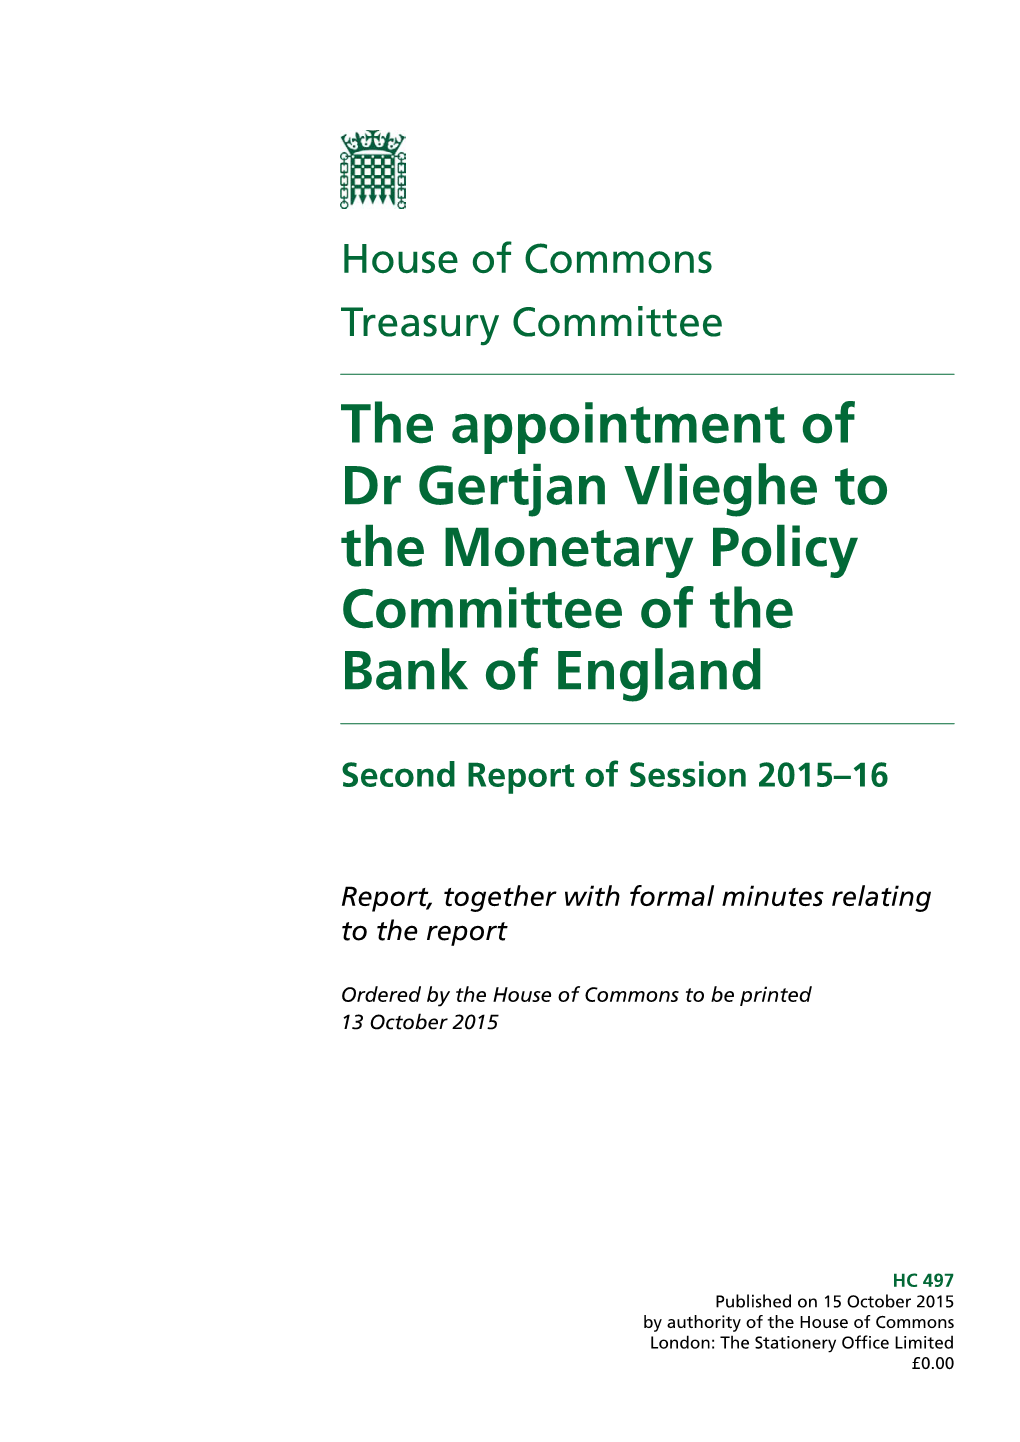 The Appointment of Dr Gertjan Vlieghe to the Monetary Policy Committee of the Bank of England